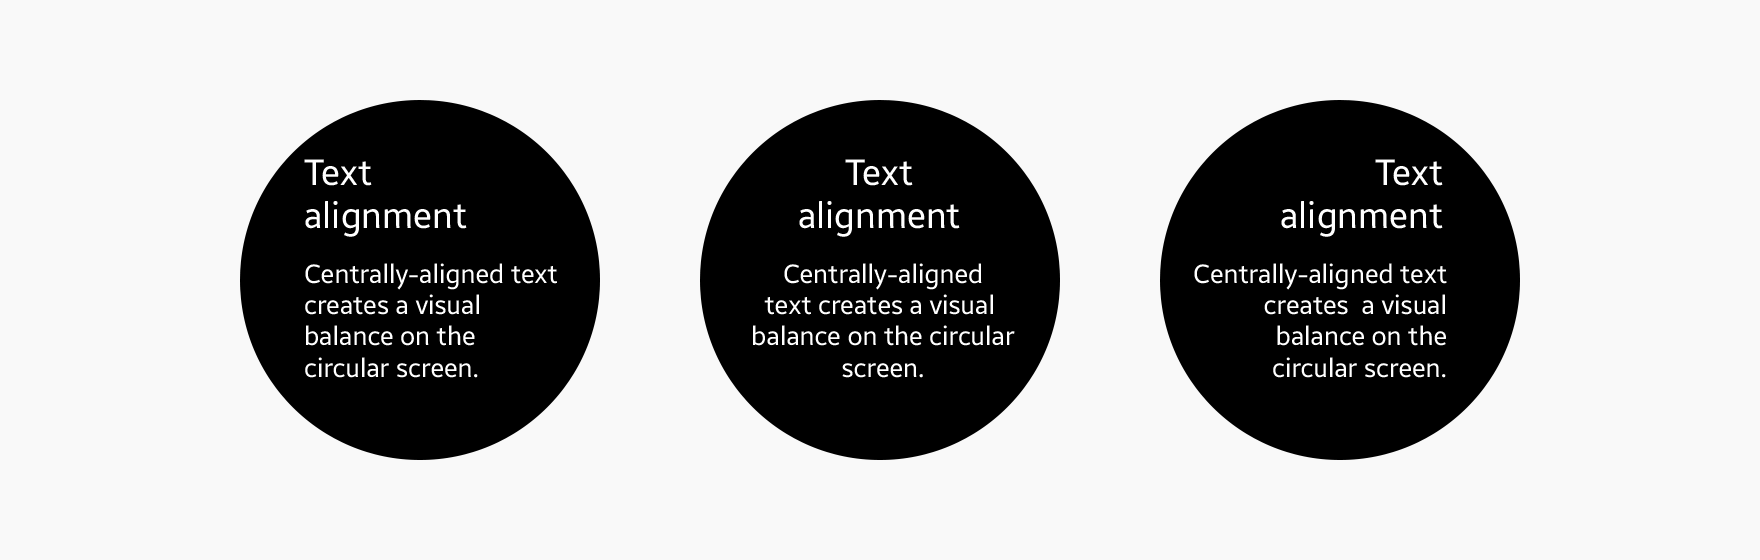 We recommend aligning text to the left or in the center when the text is long.